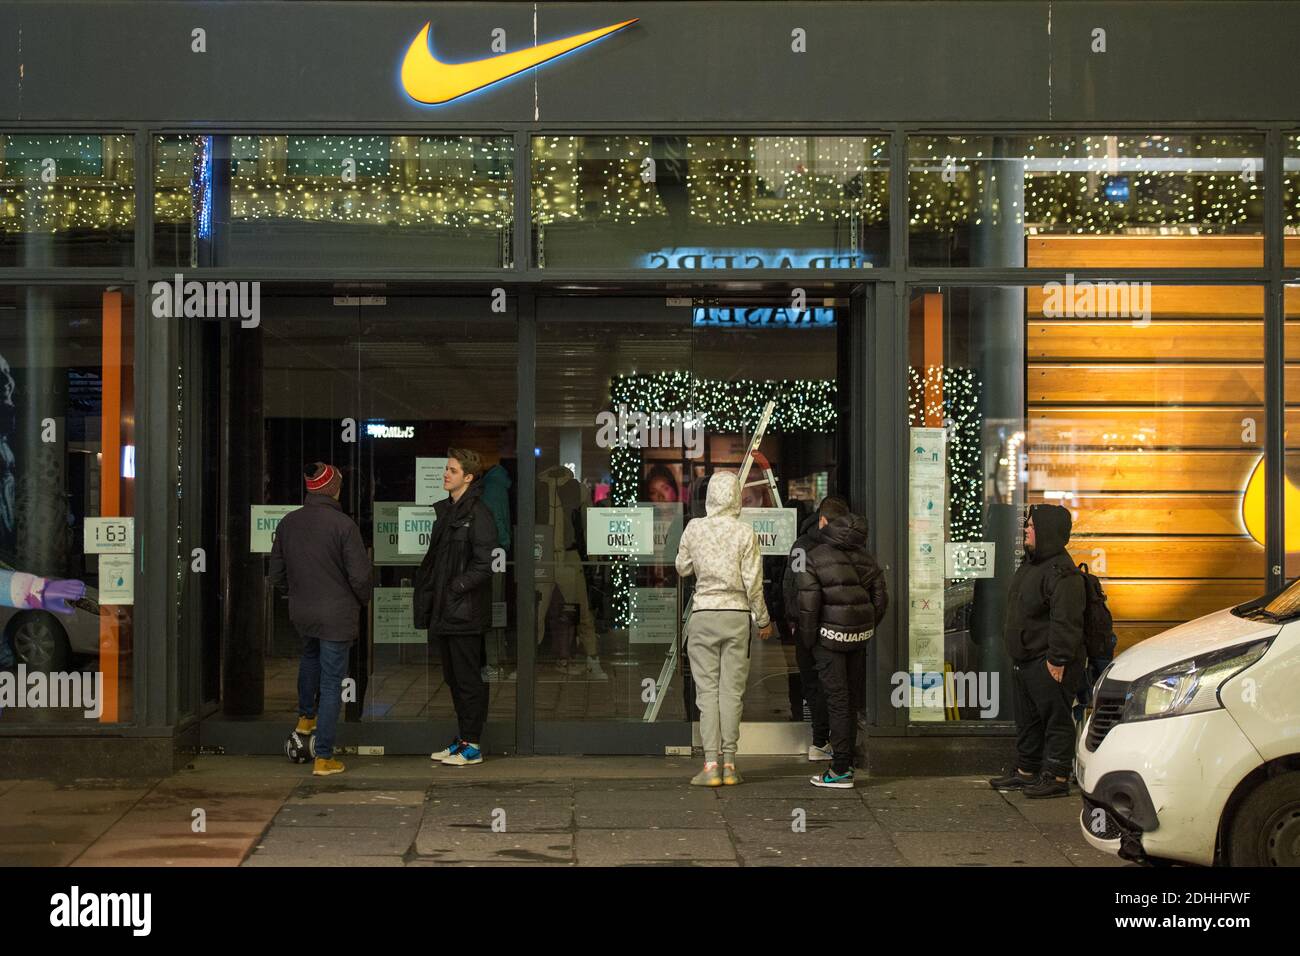 nike store for 4e people